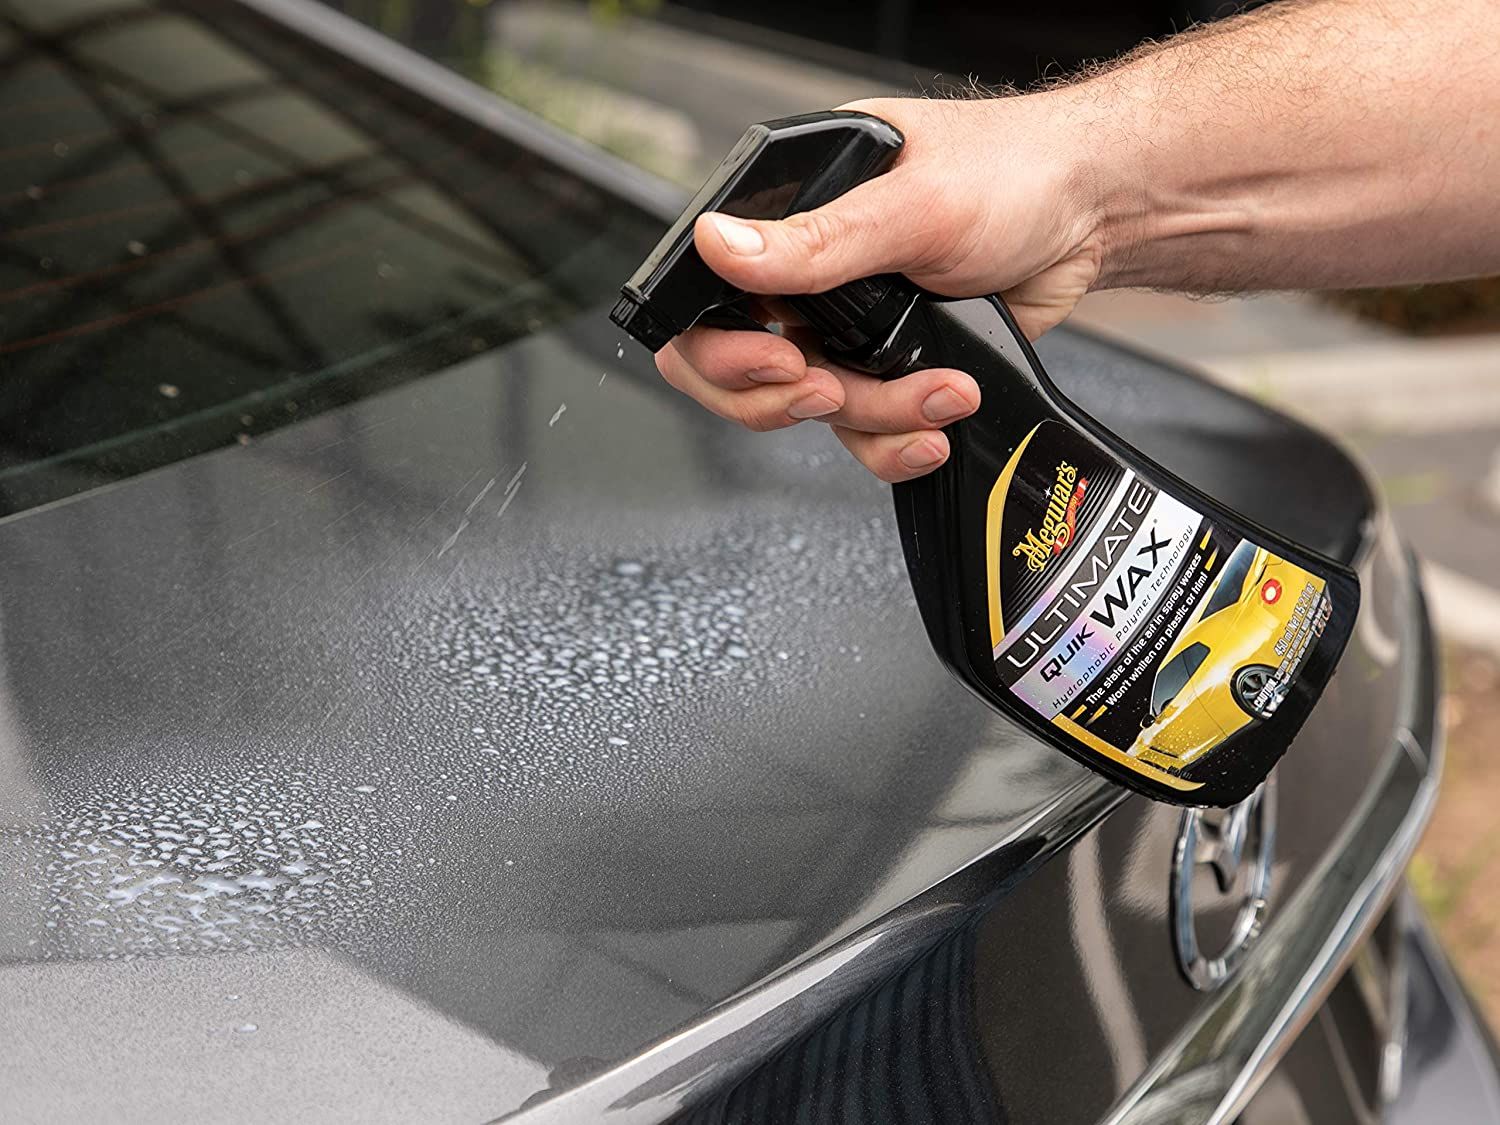 Meguiar's Ultimate Liquid Wax, Long-Lasting, Easy to Use Synthetic